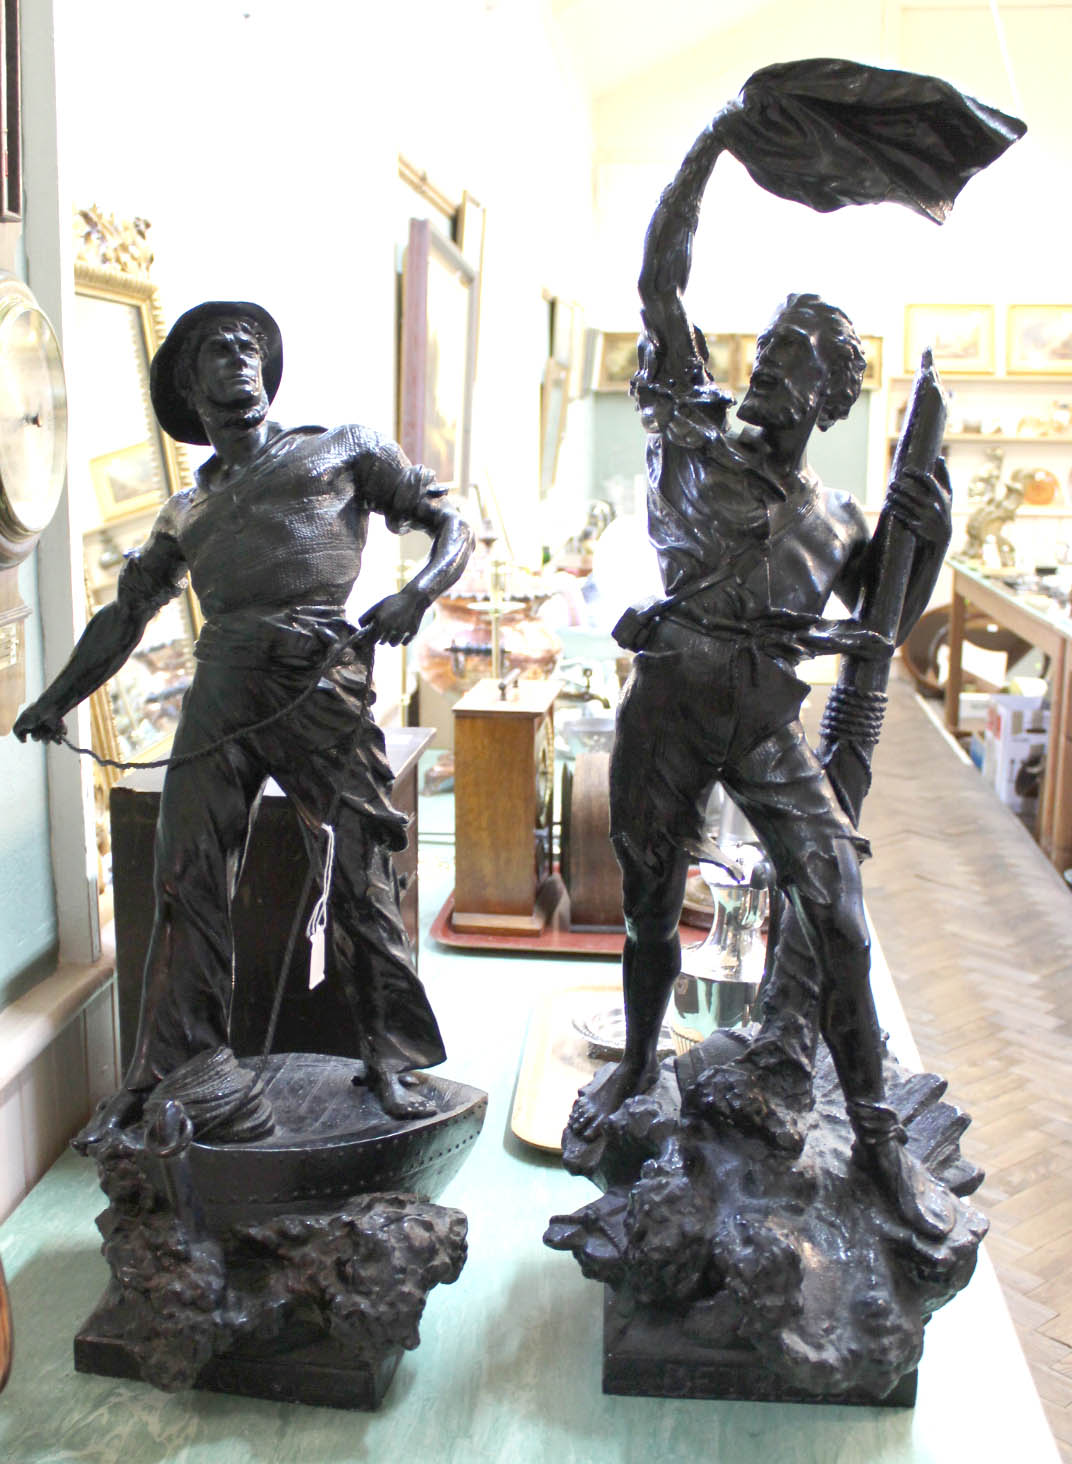 A large matched pair of spelter fishermen,